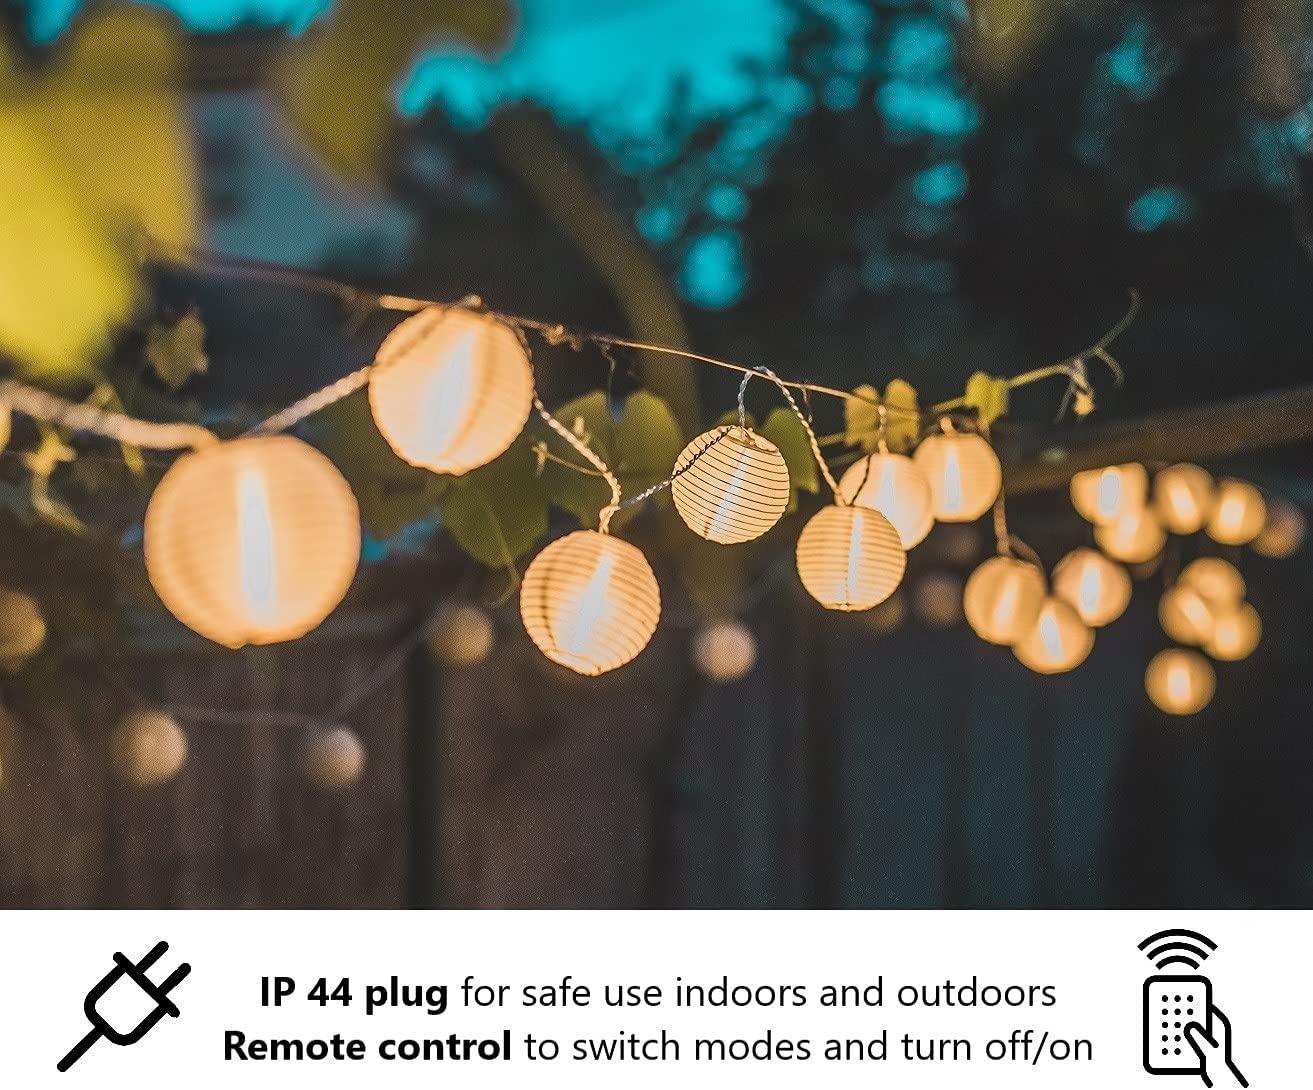 21ft Mini Lantern String Lights with Remote for Outdoor Weddings - Lasercutwraps Shop